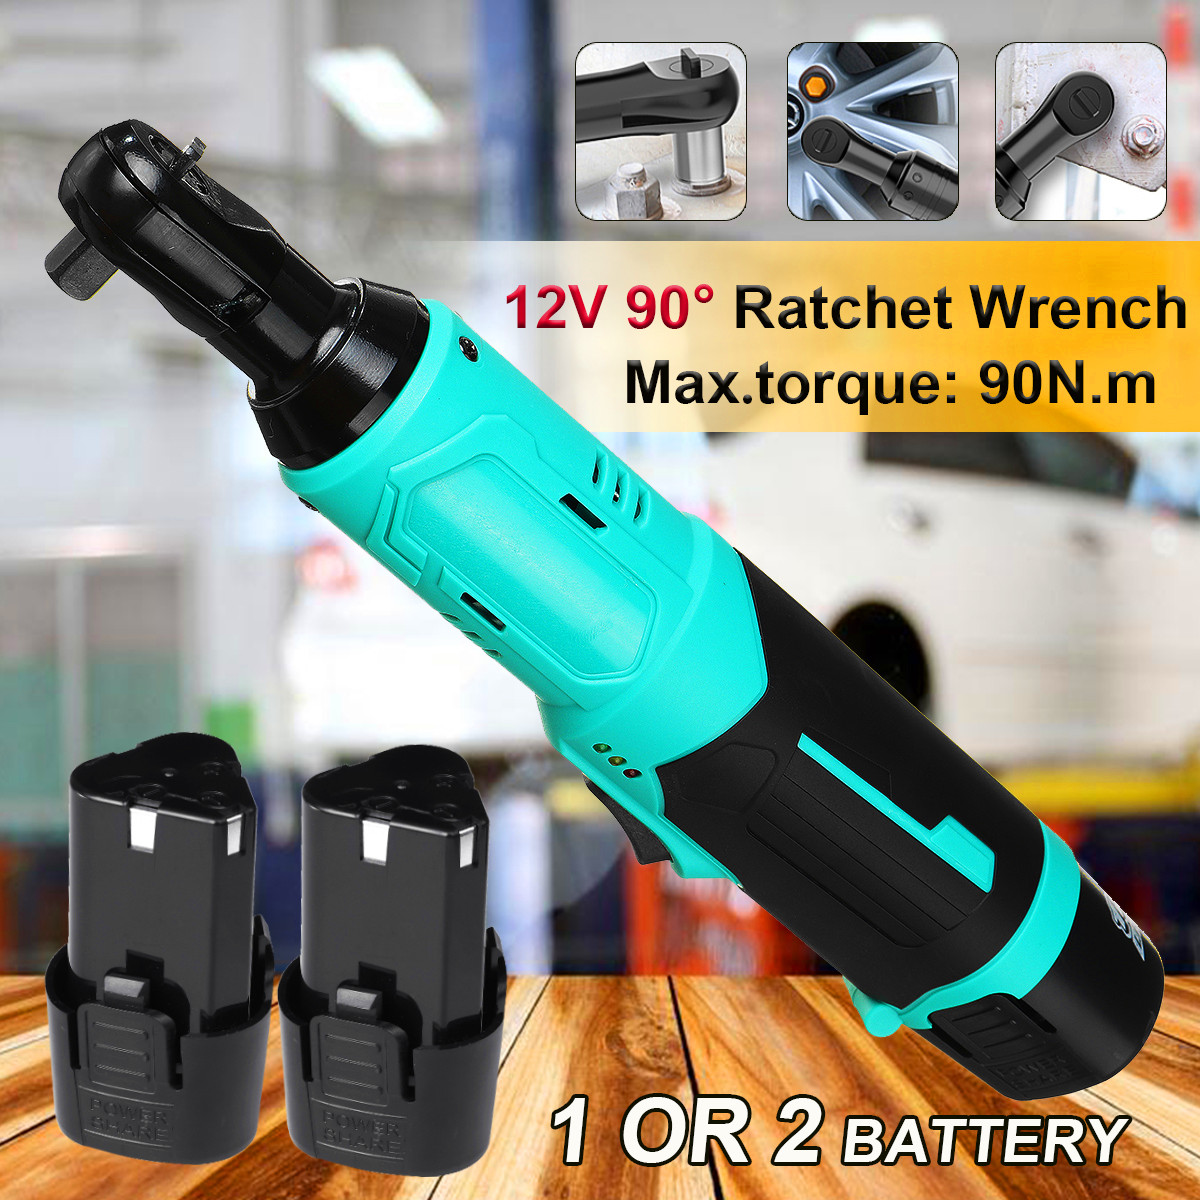 12V-Electric-Ratchet-Wrench-90-degree-Angle-Ratchet-Wrench-Tool-W-1-or-2-Battery-1783106-2